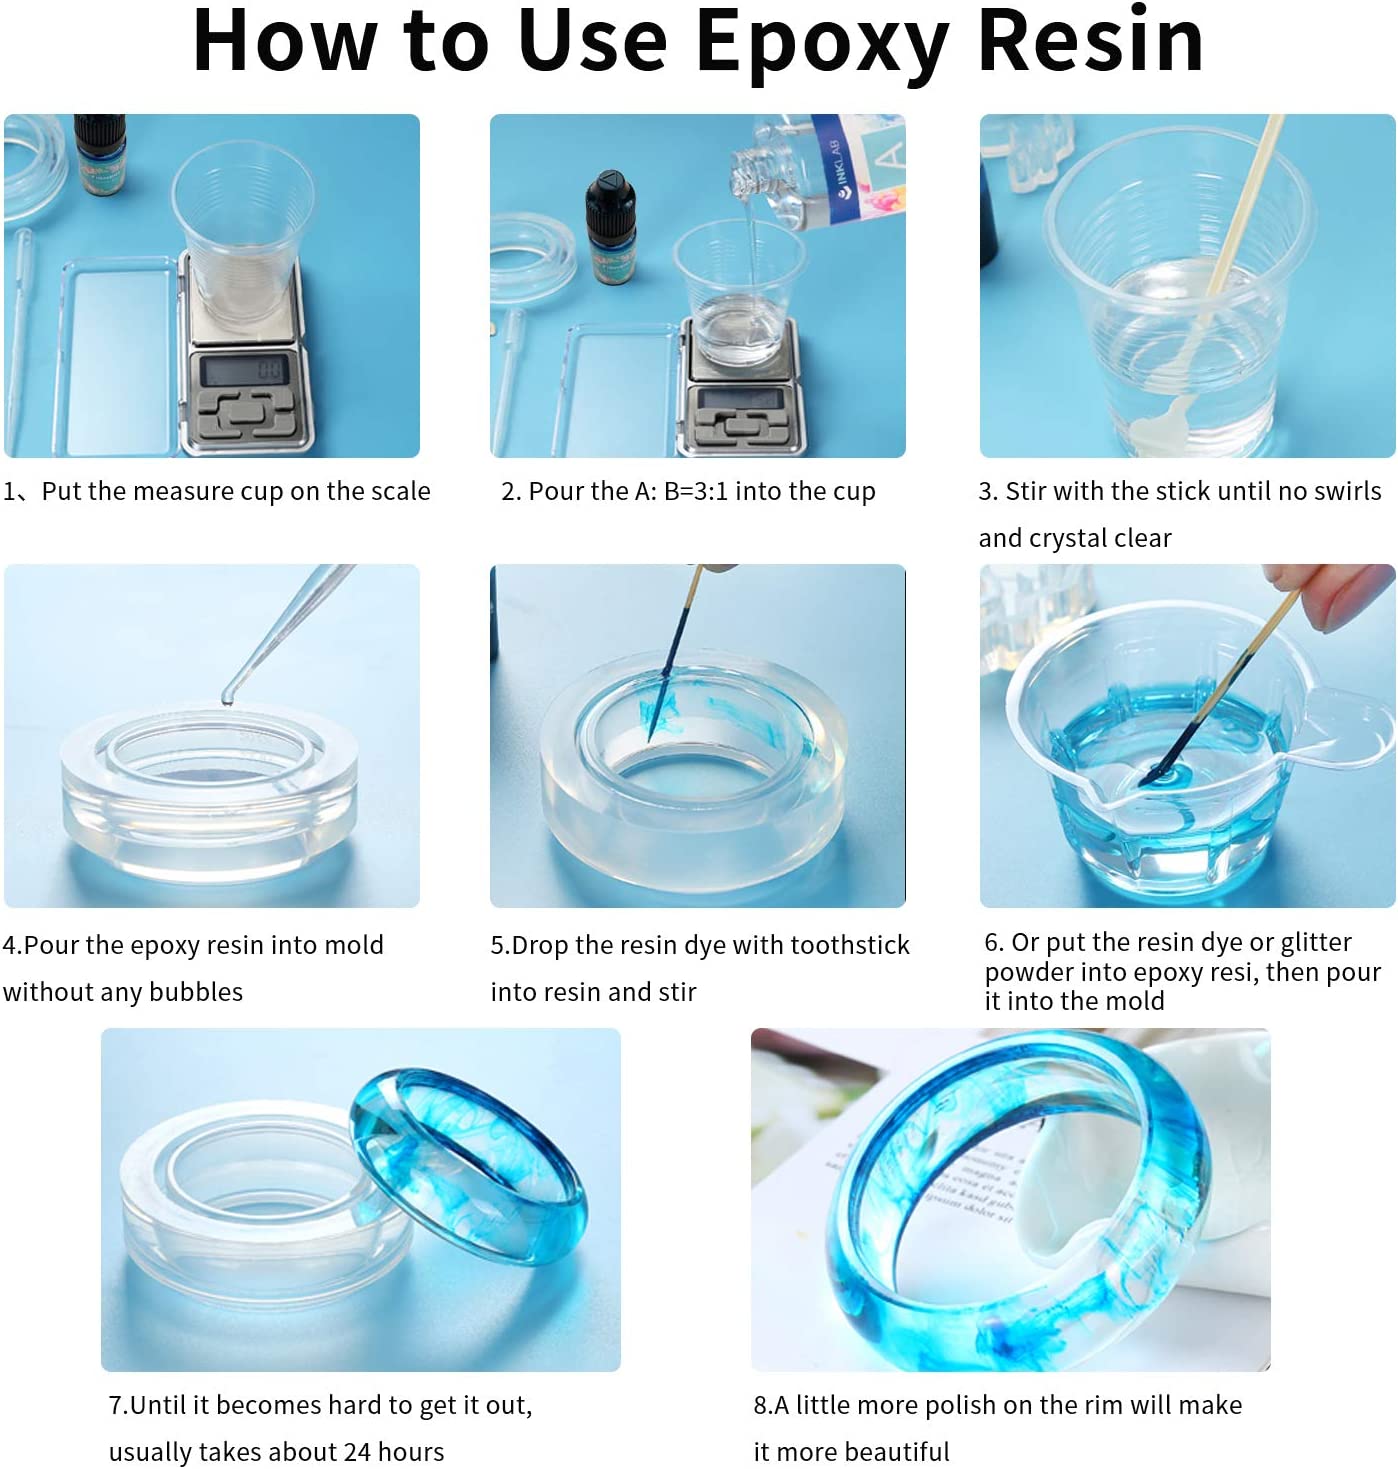 Clear Pour 32oz Epoxy Resin Kit - Premium Crystal Clear Epoxy Resin Kit - Art Resin, Craft, Jewelry Casting, DIY, Tumblers, Wood & Resin Molds